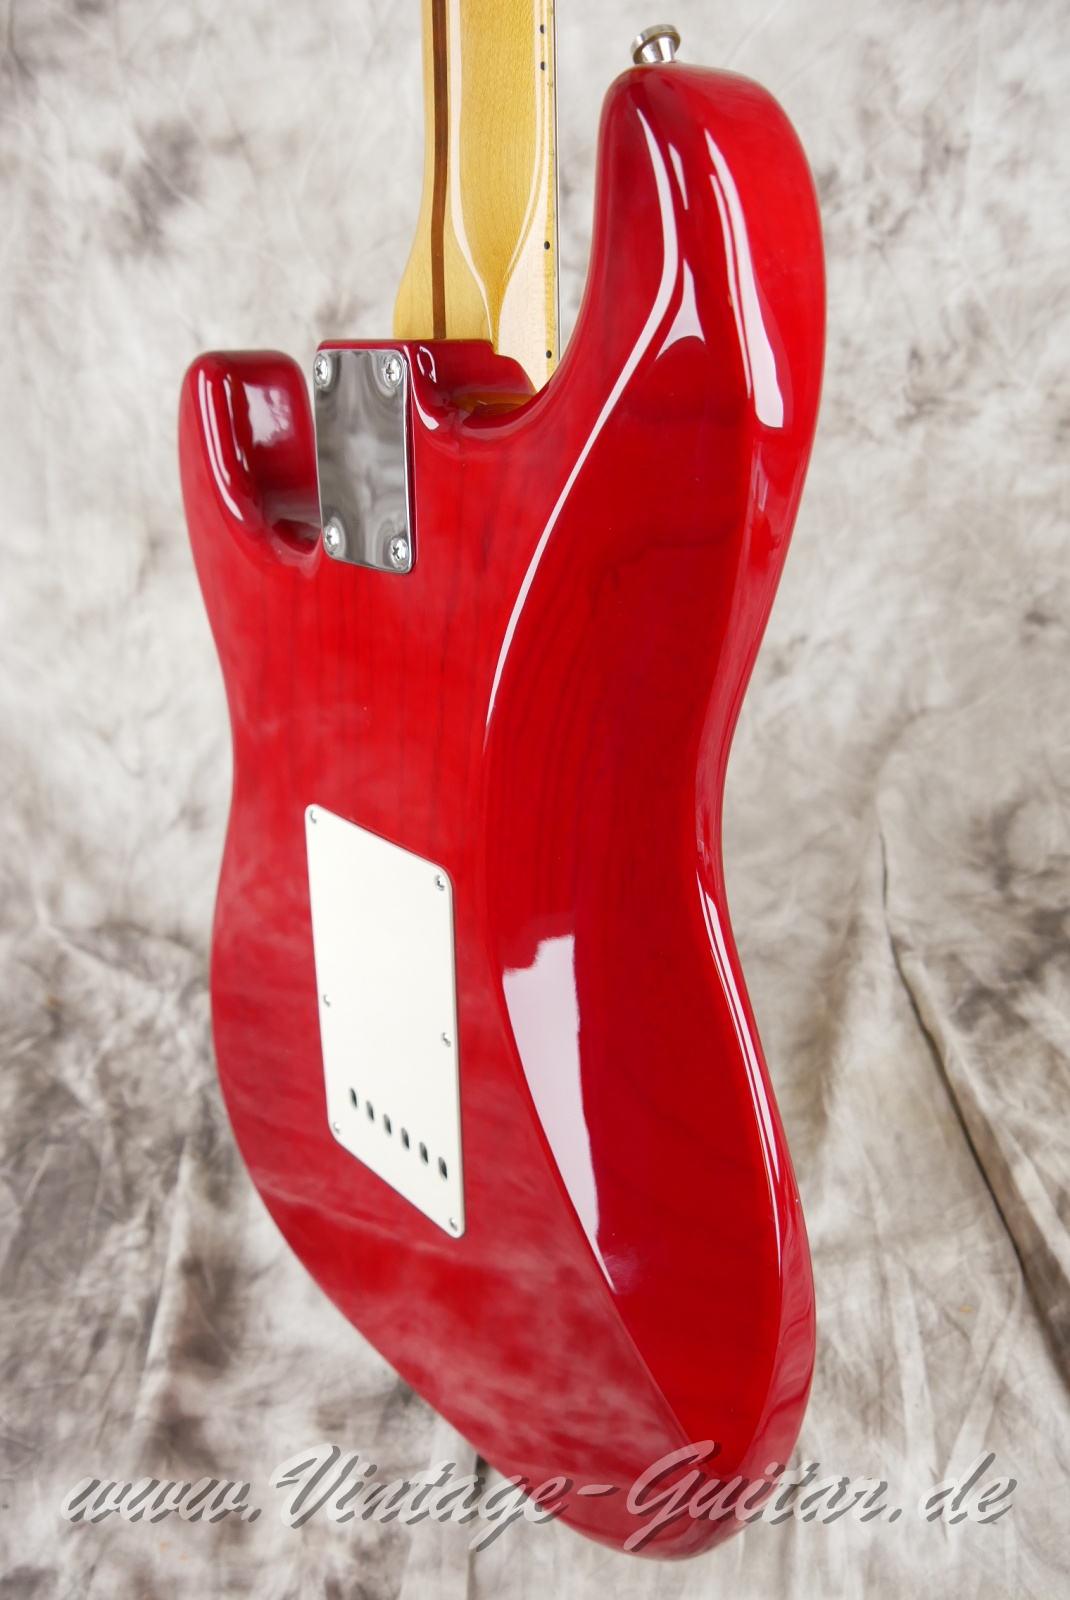 Fender_Stratocaster_classic_50s_Mexico_transparent_red_2010-012.JPG